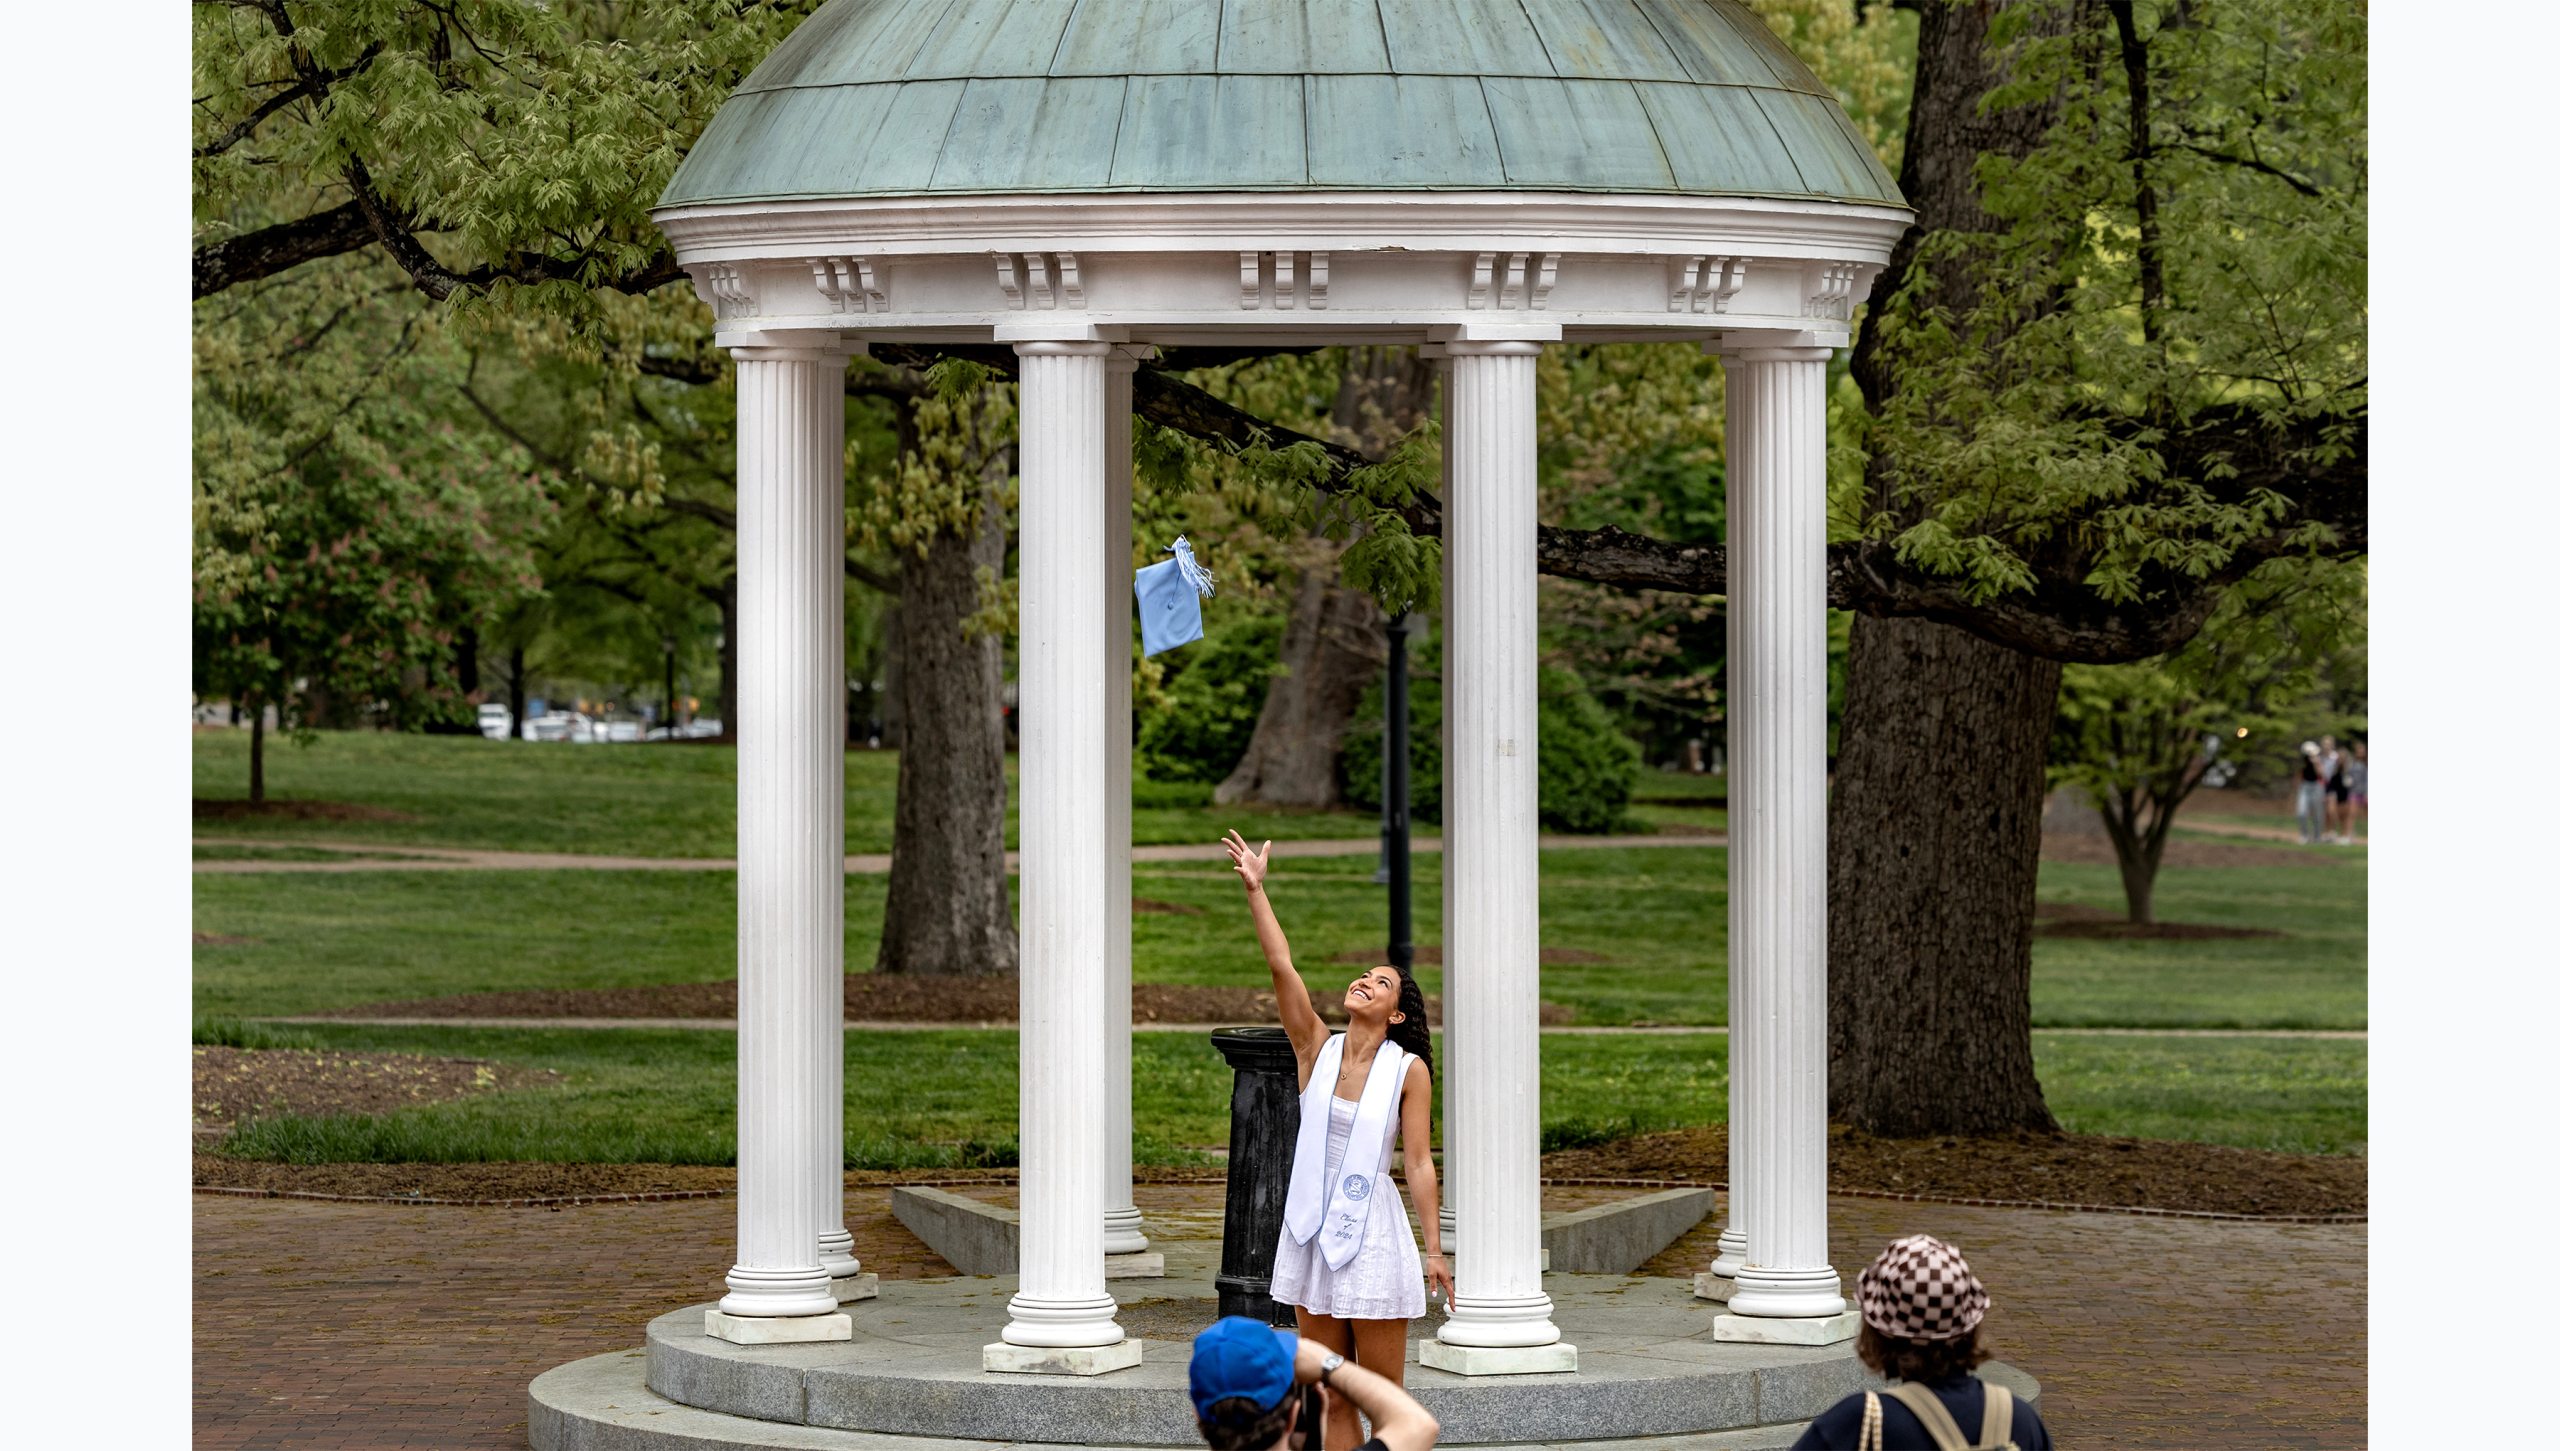 A student tossing her cap up in the air as she poses for a graduation photo at the Old Well.